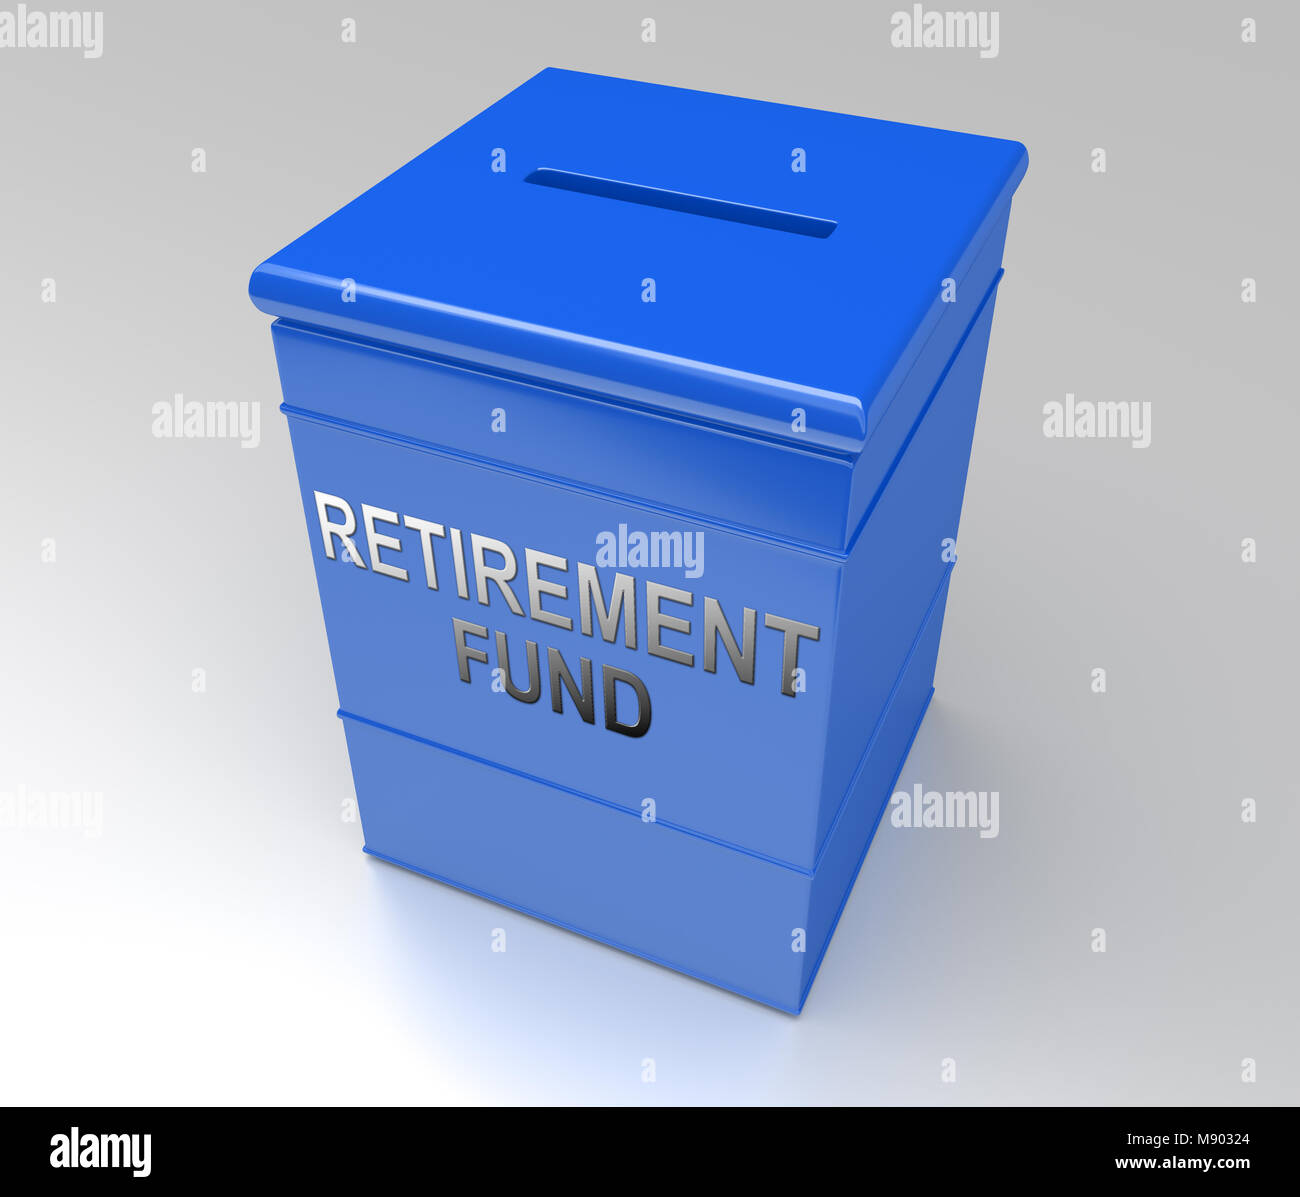 3d Illustration depicting a blue money box with a retirement fund concept. Stock Photo